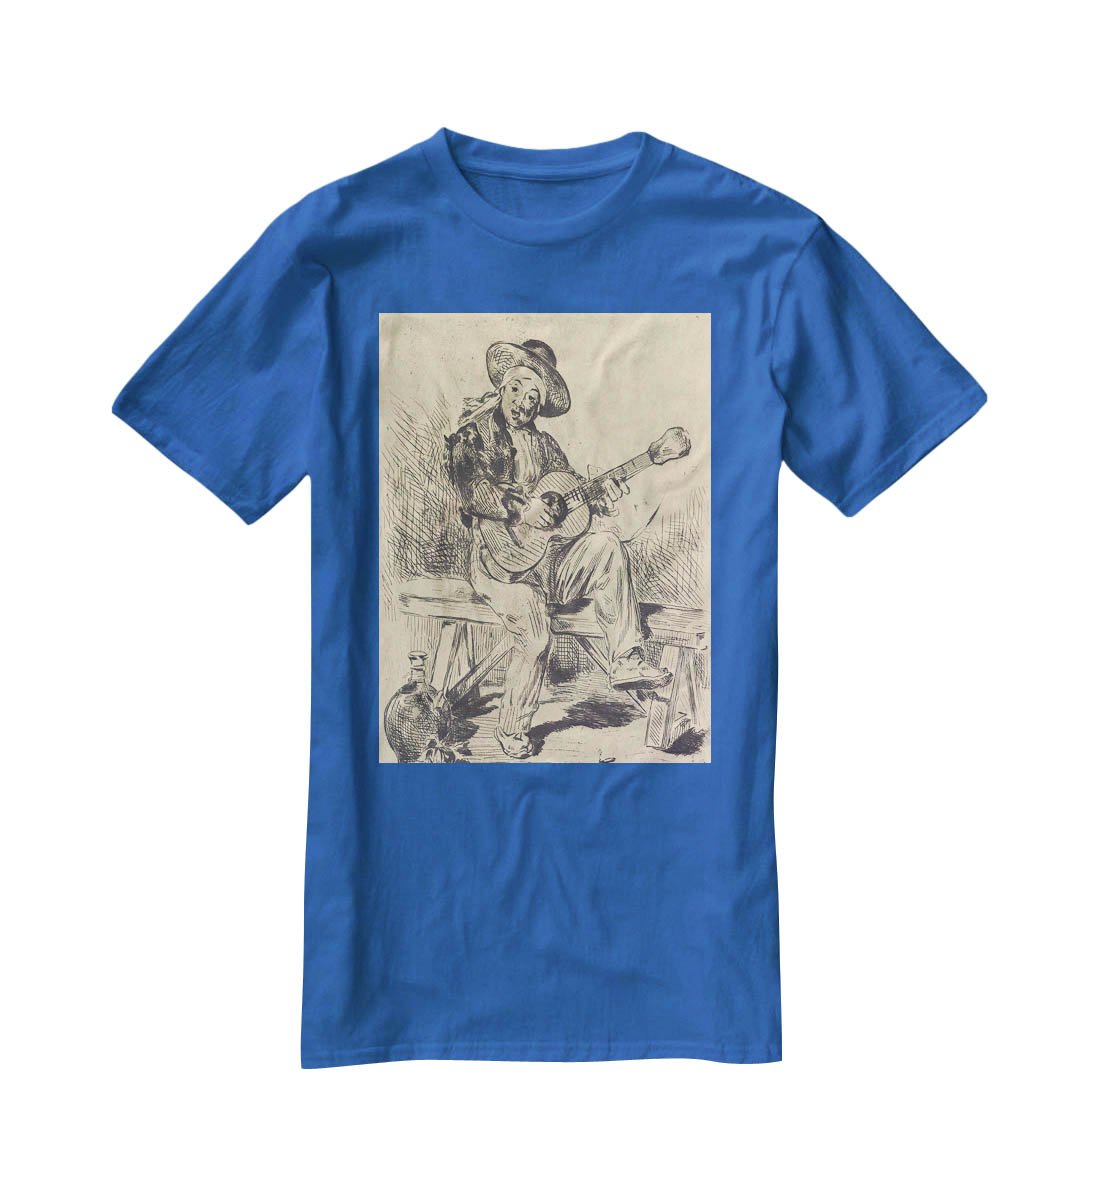 The guitar Player by Manet T-Shirt - Canvas Art Rocks - 2